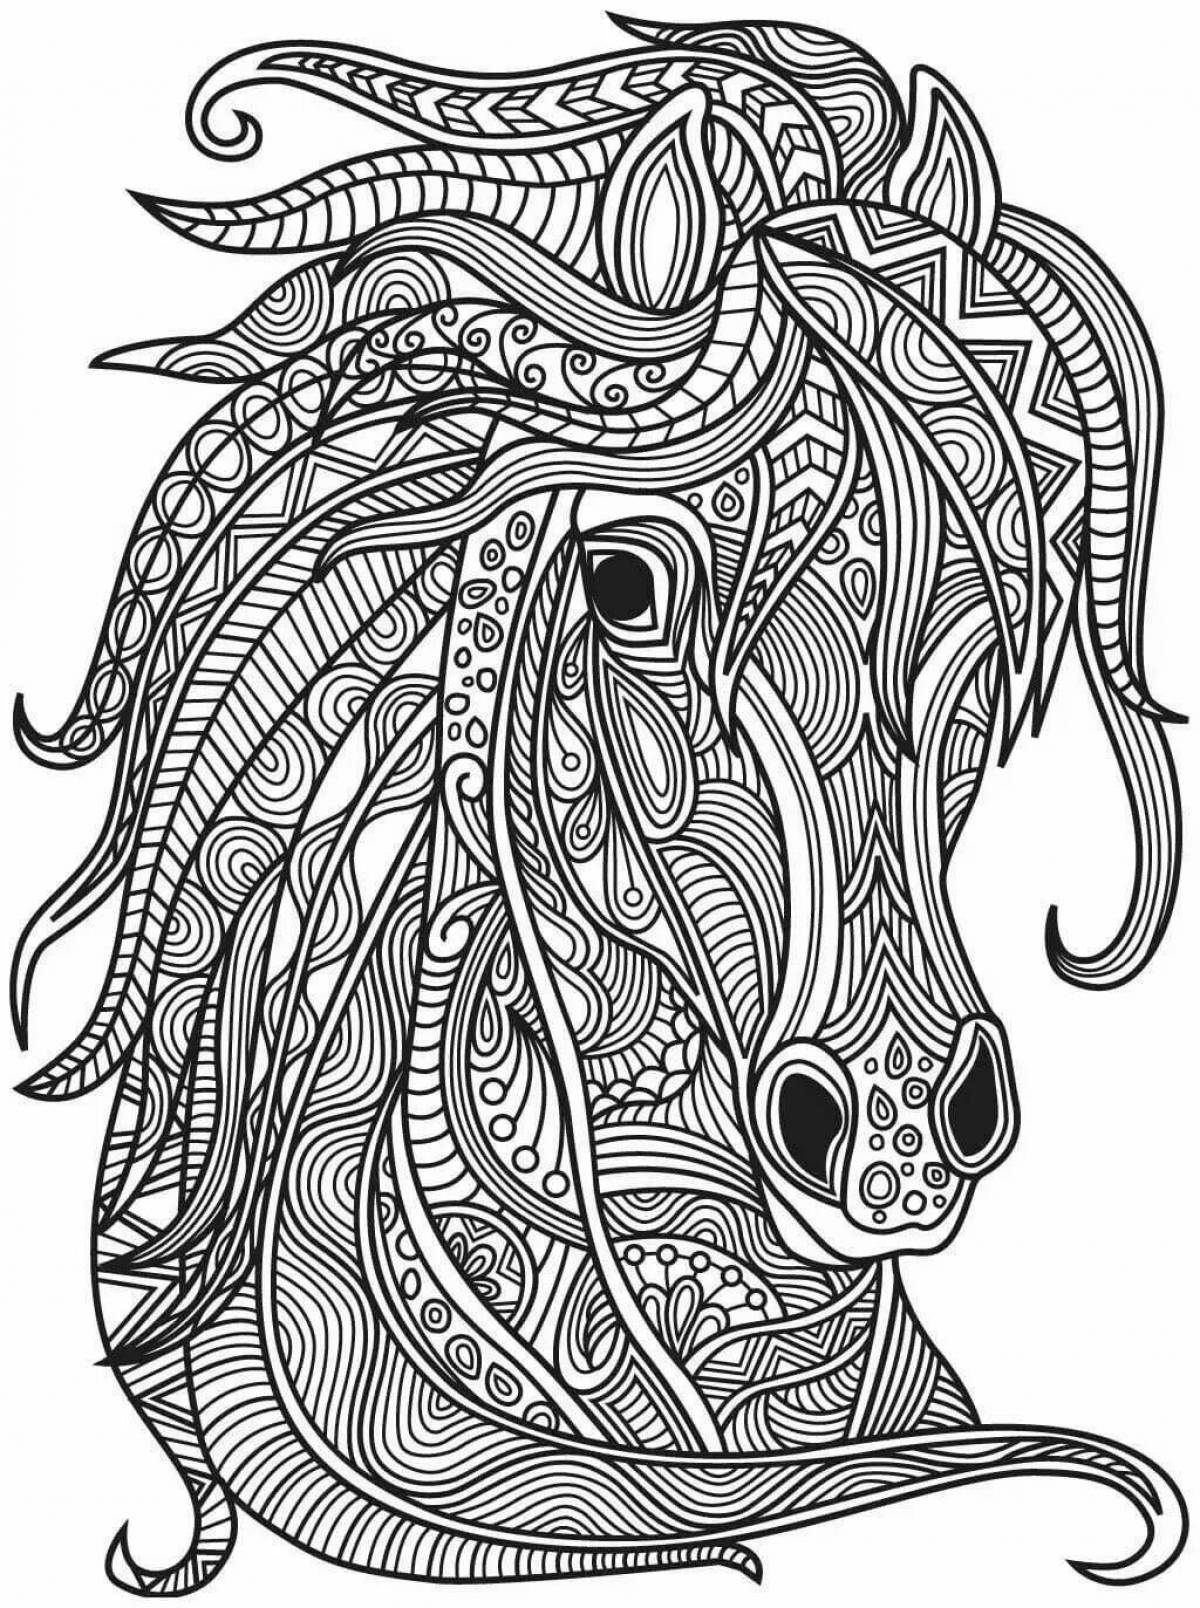 Shining Antistress Animal Complex Coloring Page